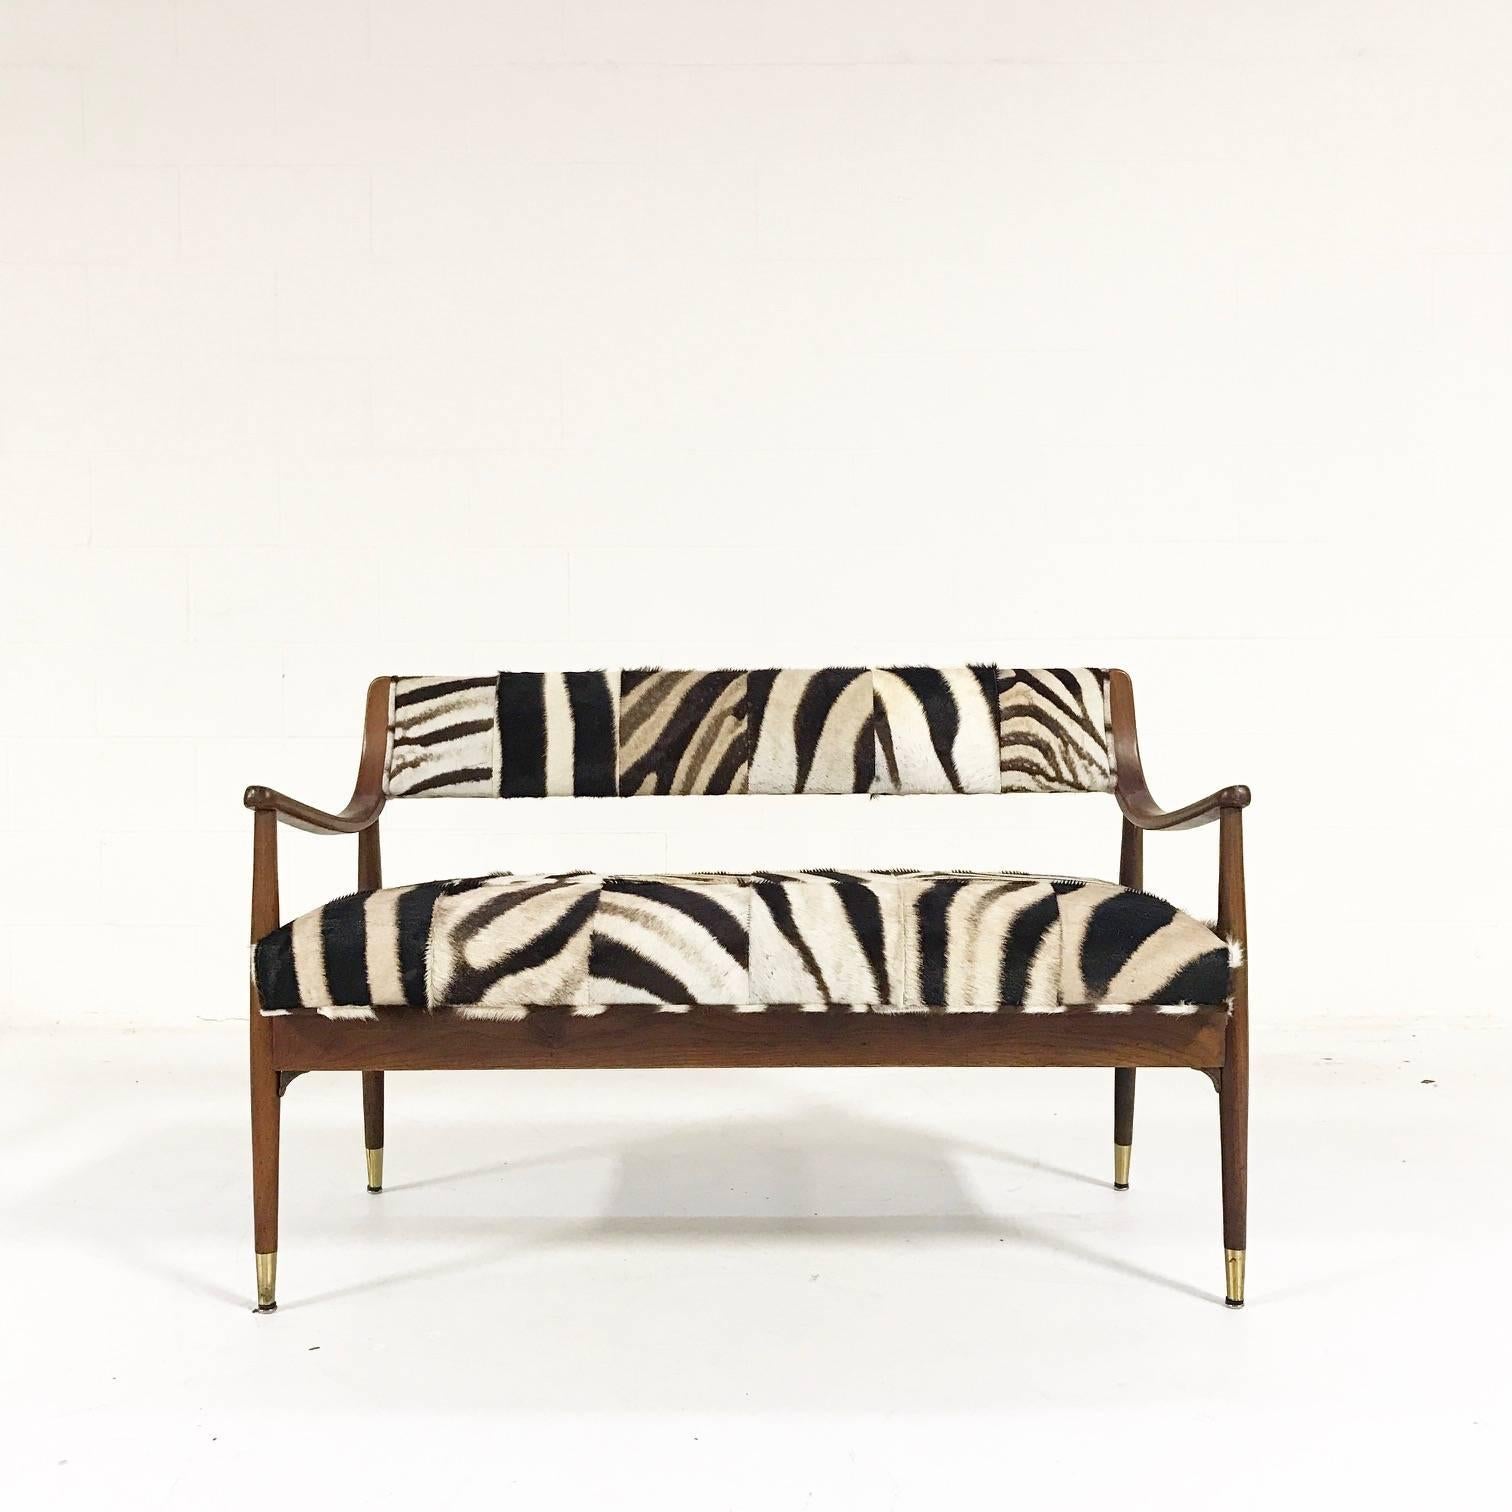 We love the combination of the hand-cut and hand-sewn patchwork zebra hide with this simple, elegant Danish settee. There is something so visually stimulating about patches of zebra hide. The chaos of stripes going every which way, the black and